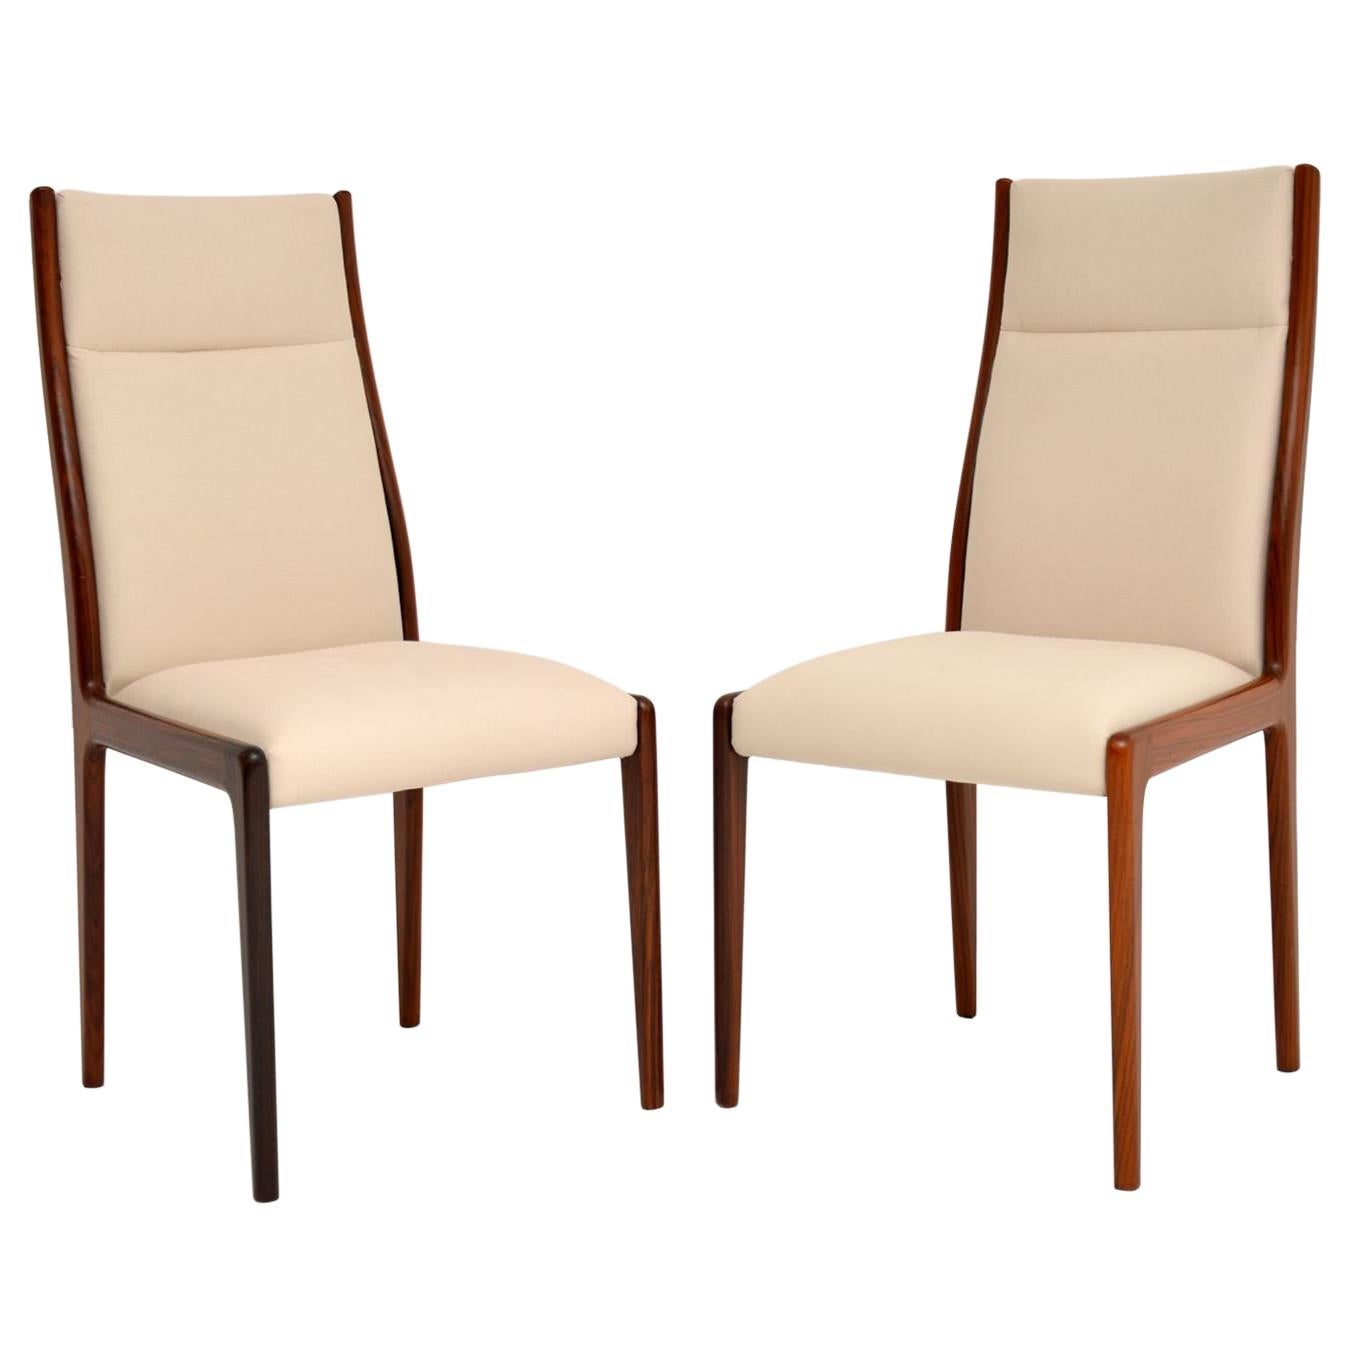 1960s Pair of Danish Side Chairs / Dining Chairs